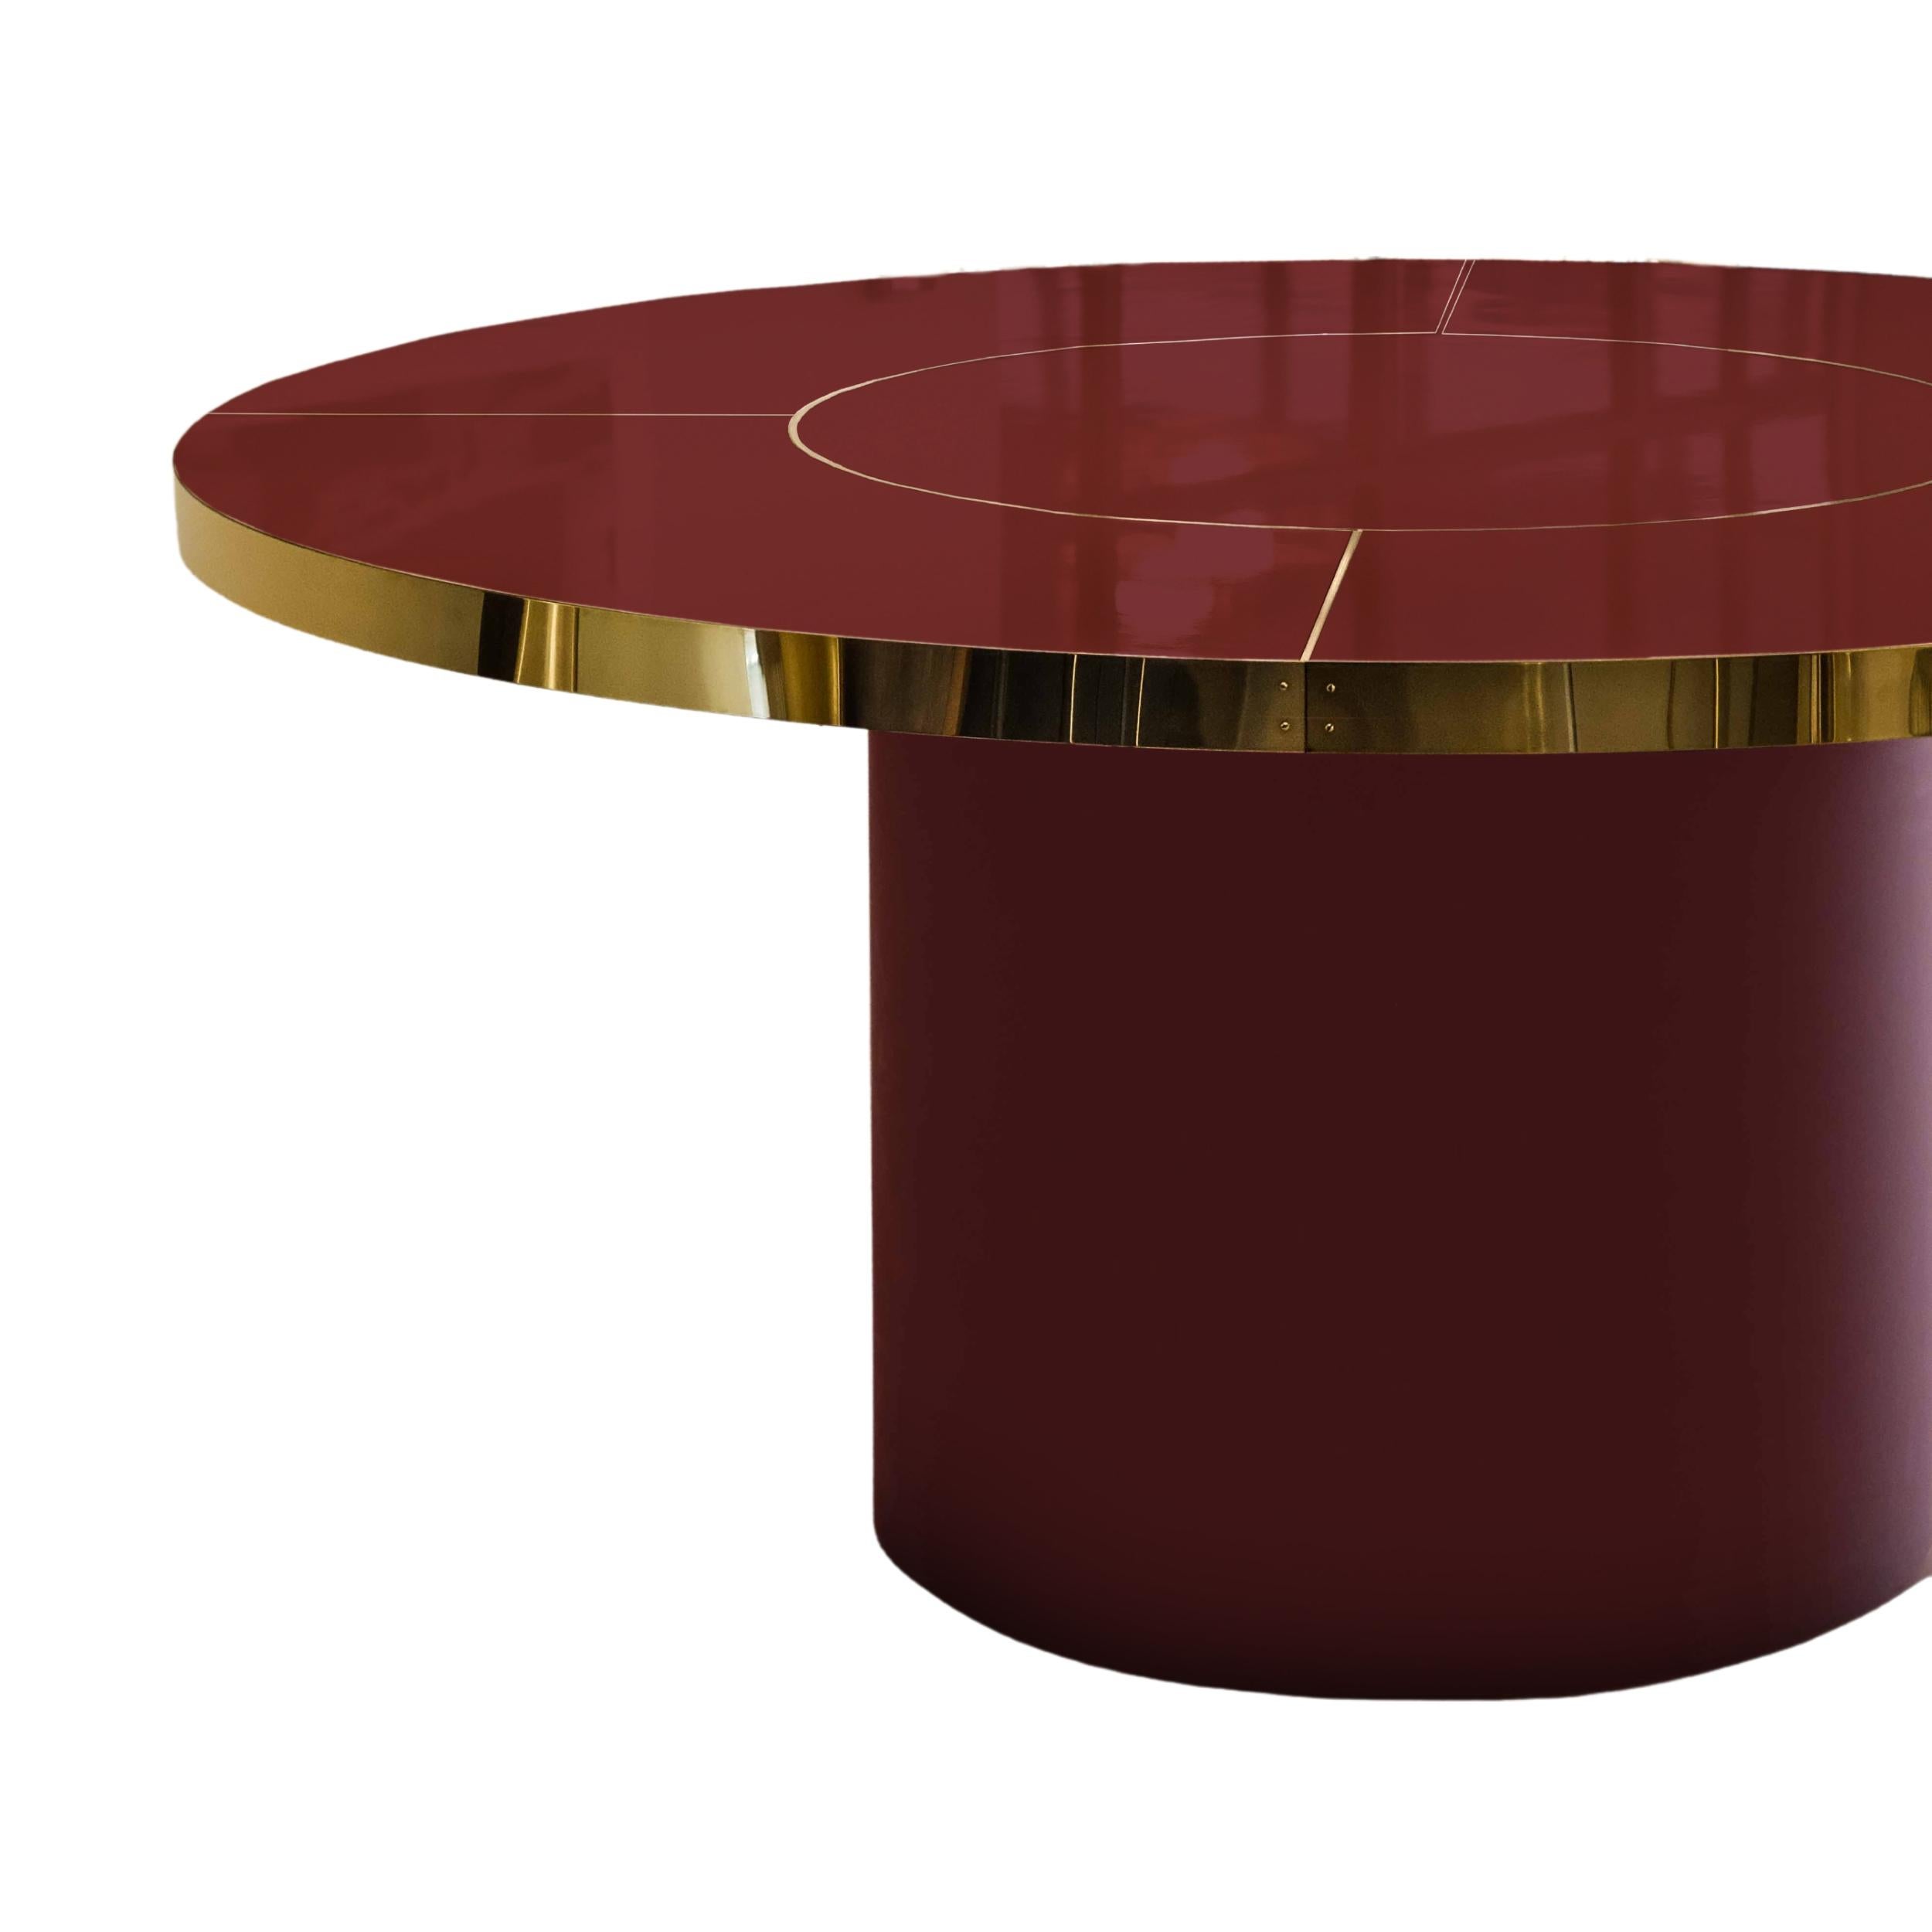 Retro Design Round Dining Table Palm Springs Style High Gloss Laminated & Brass Details M Size

Discover our incredible collection of retro-style design tables inspired by the iconic decoration of the 1950s, 60s, and 70s of Palm Springs in